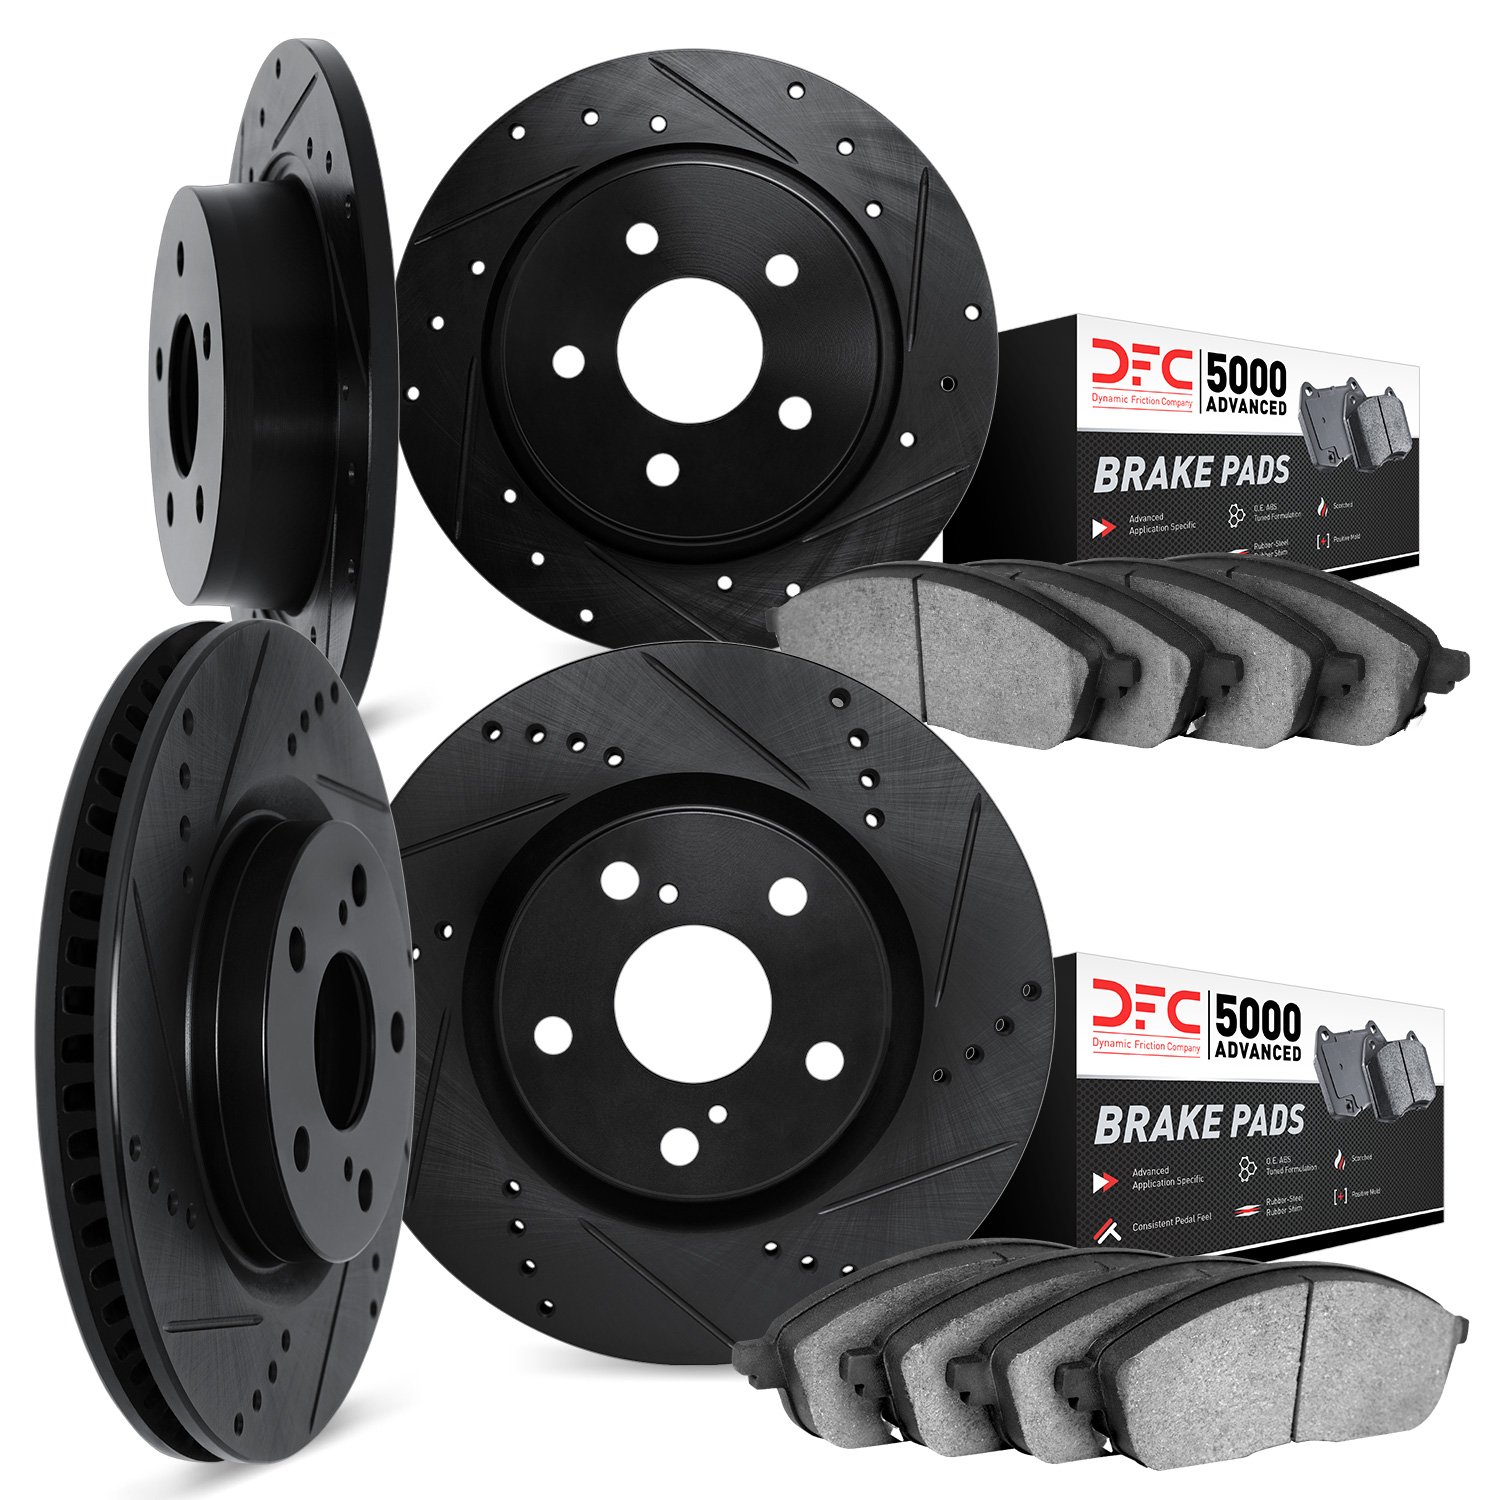 8504-13046 Drilled/Slotted Brake Rotors w/5000 Advanced Brake Pads Kit [Black], 2013-2018 Subaru, Position: Front and Rear